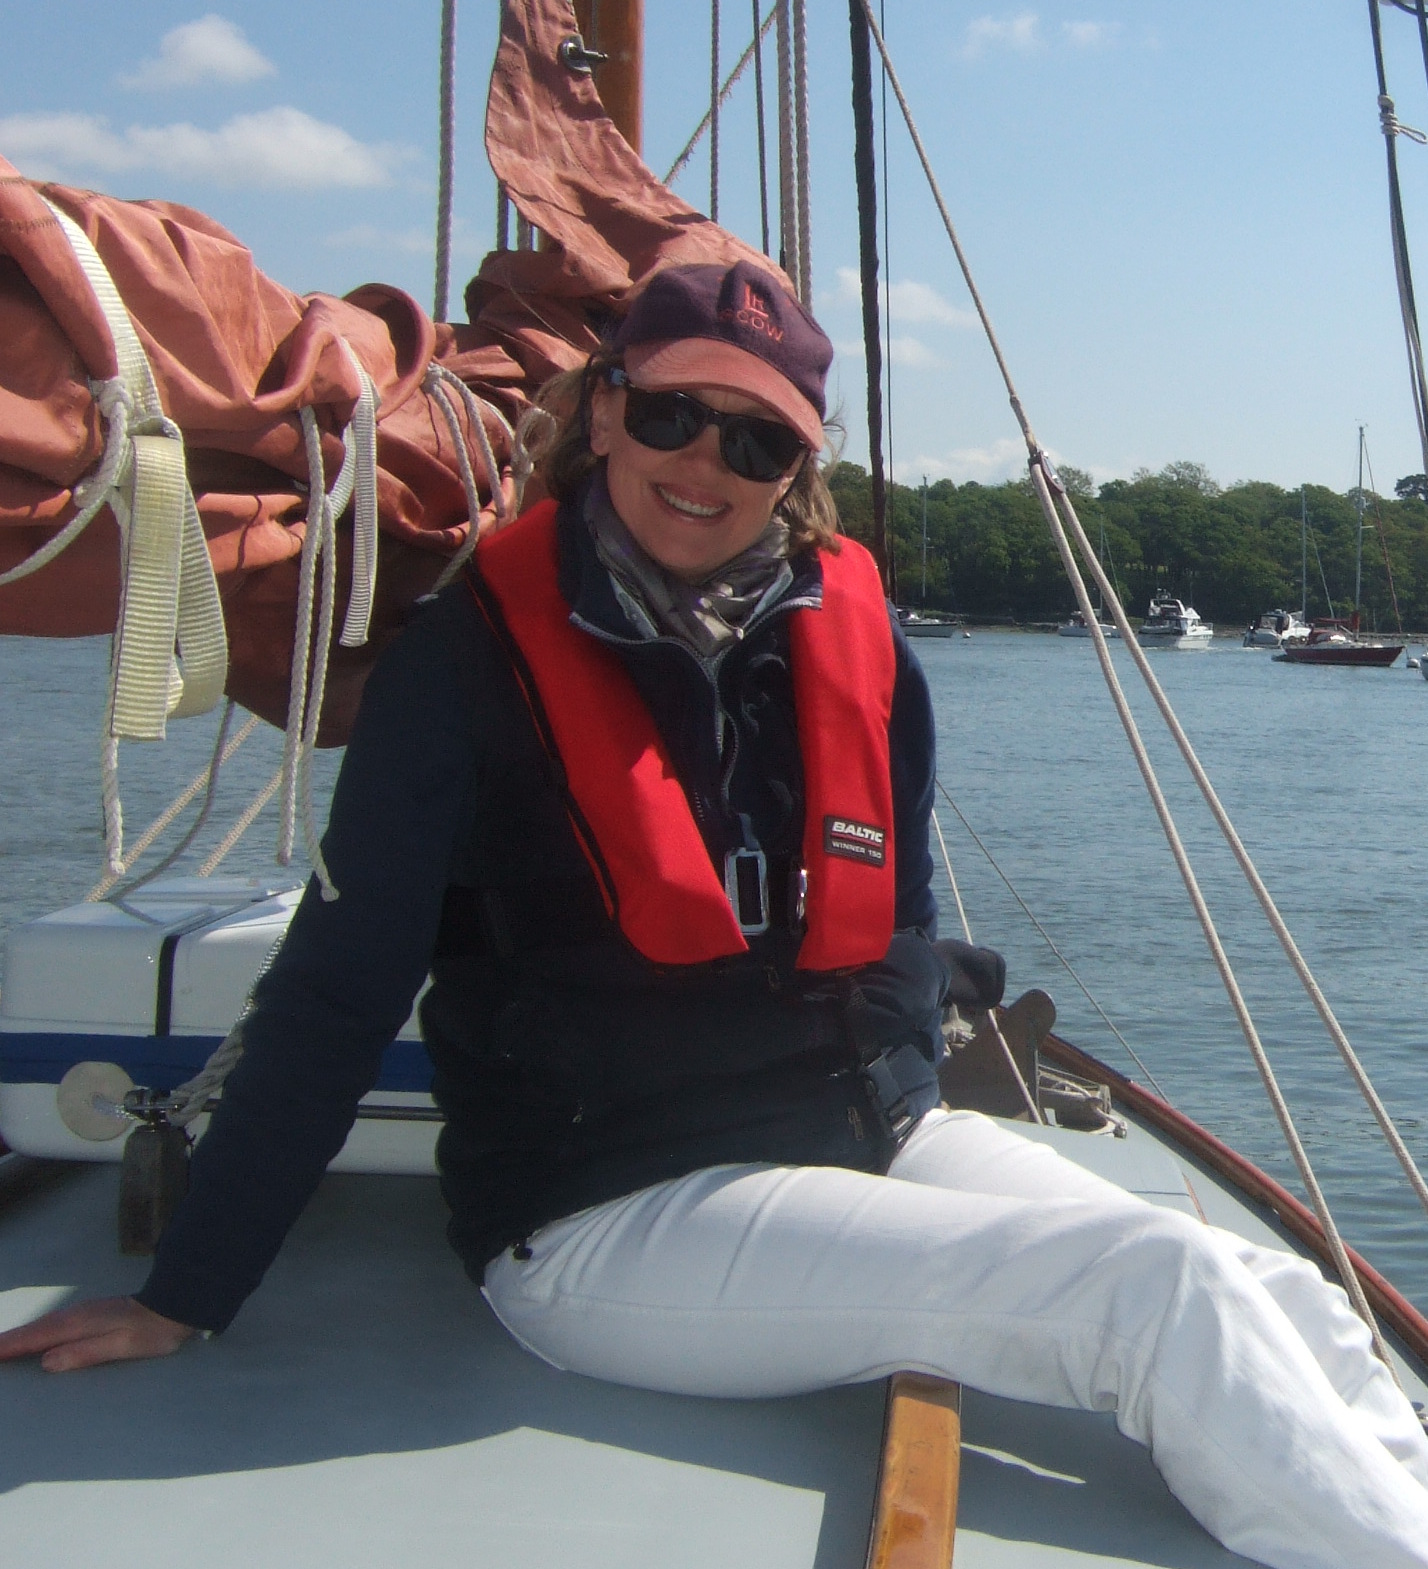 Sophie Neville sailing the 'Nancy Blackett', May 2013